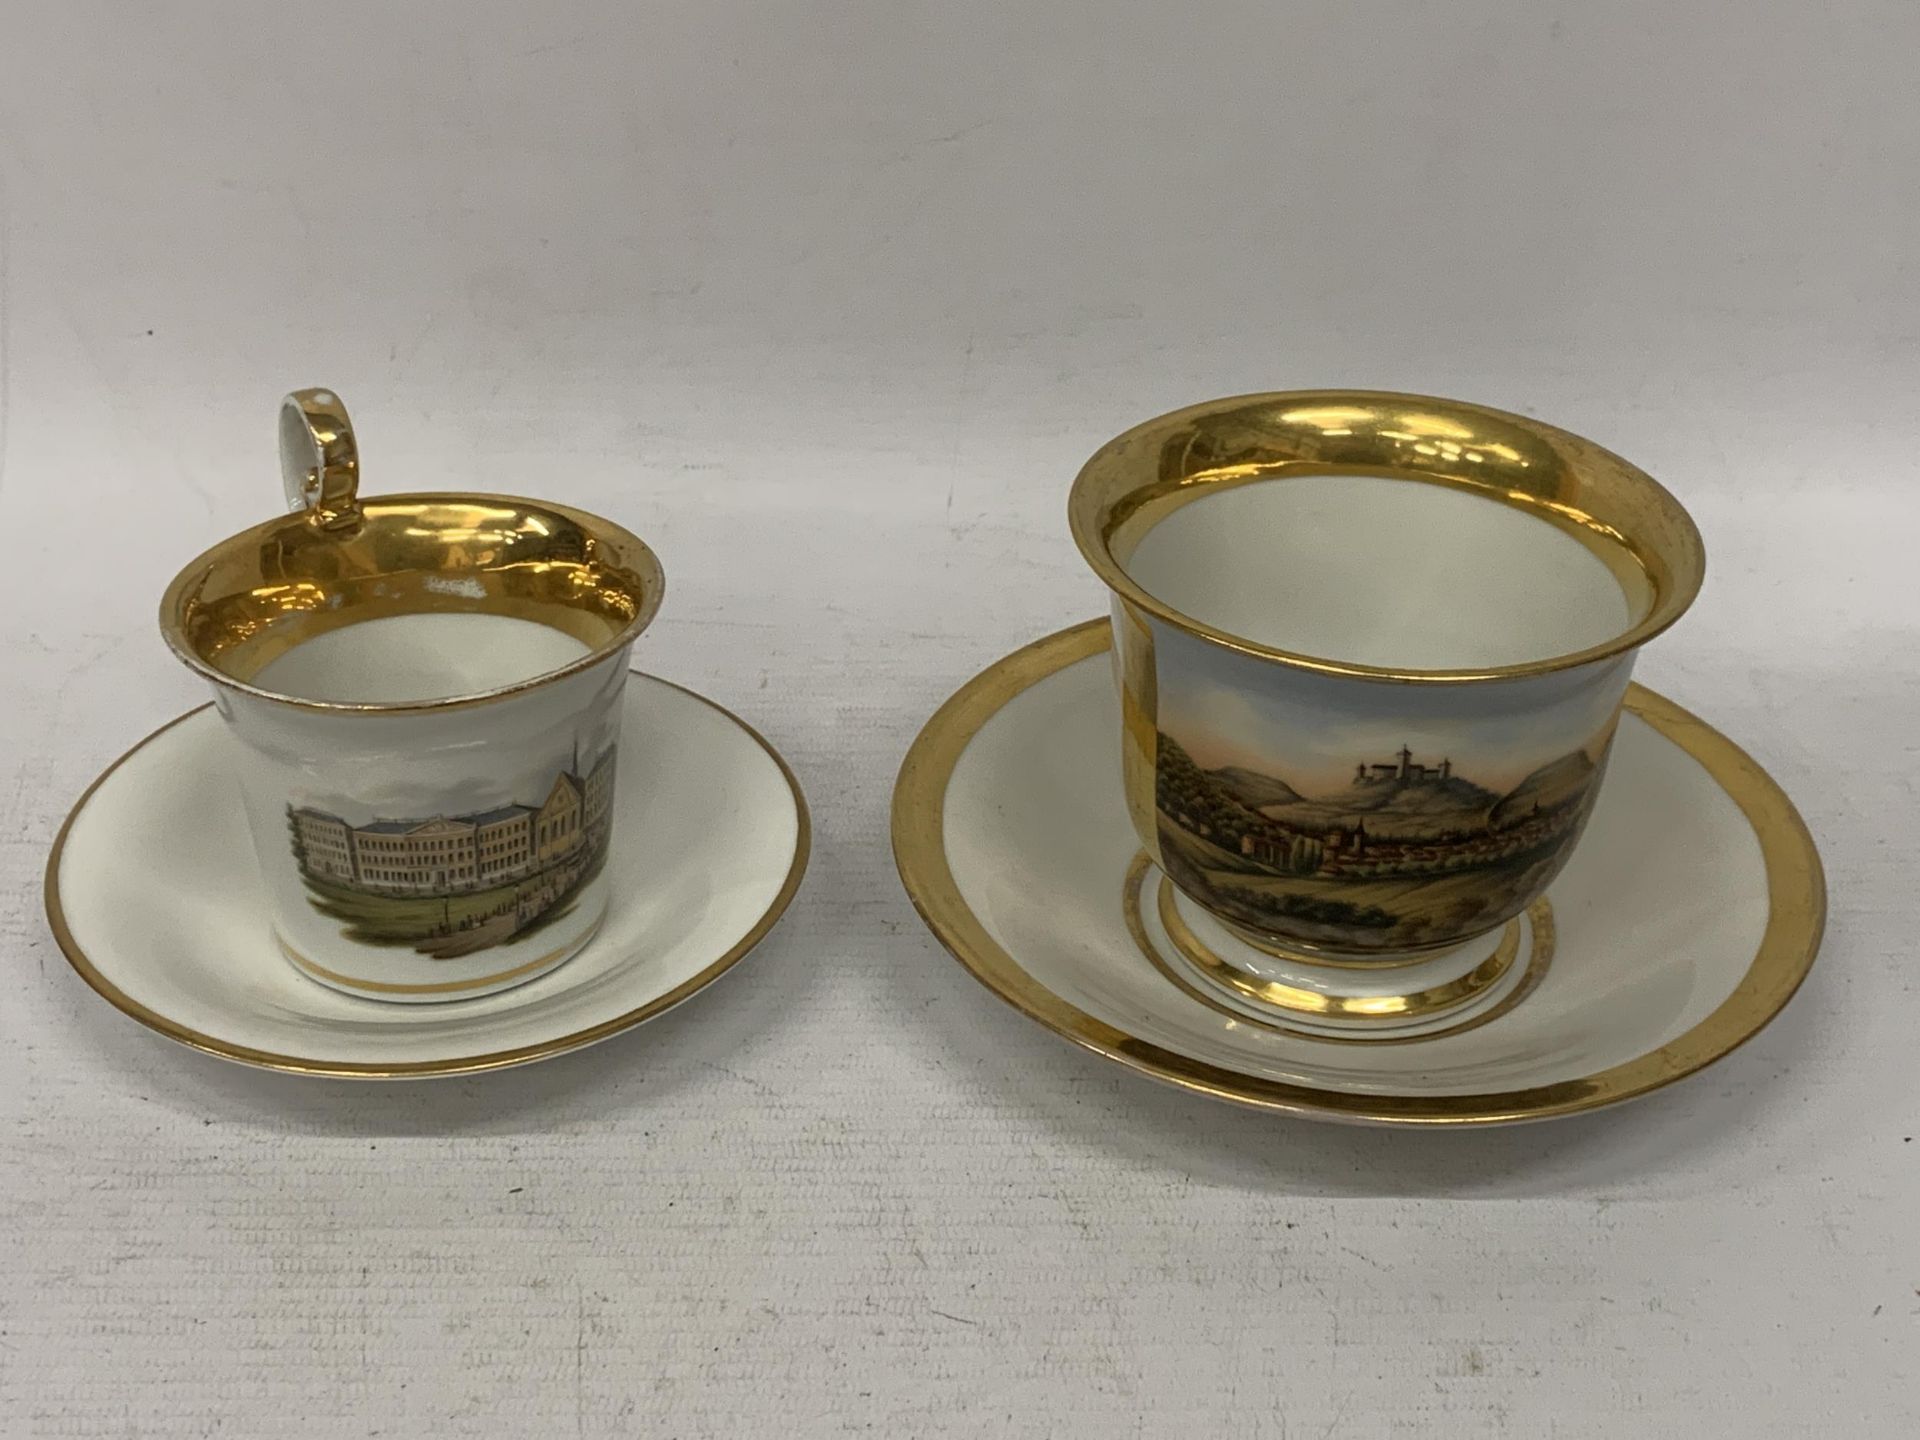 TWO CONTINENTAL HAND PAINTED PORCELAIN CUPS AND SAUCERS, BOTH WITH BLUE CONTINENTAL MARKS TO BASE